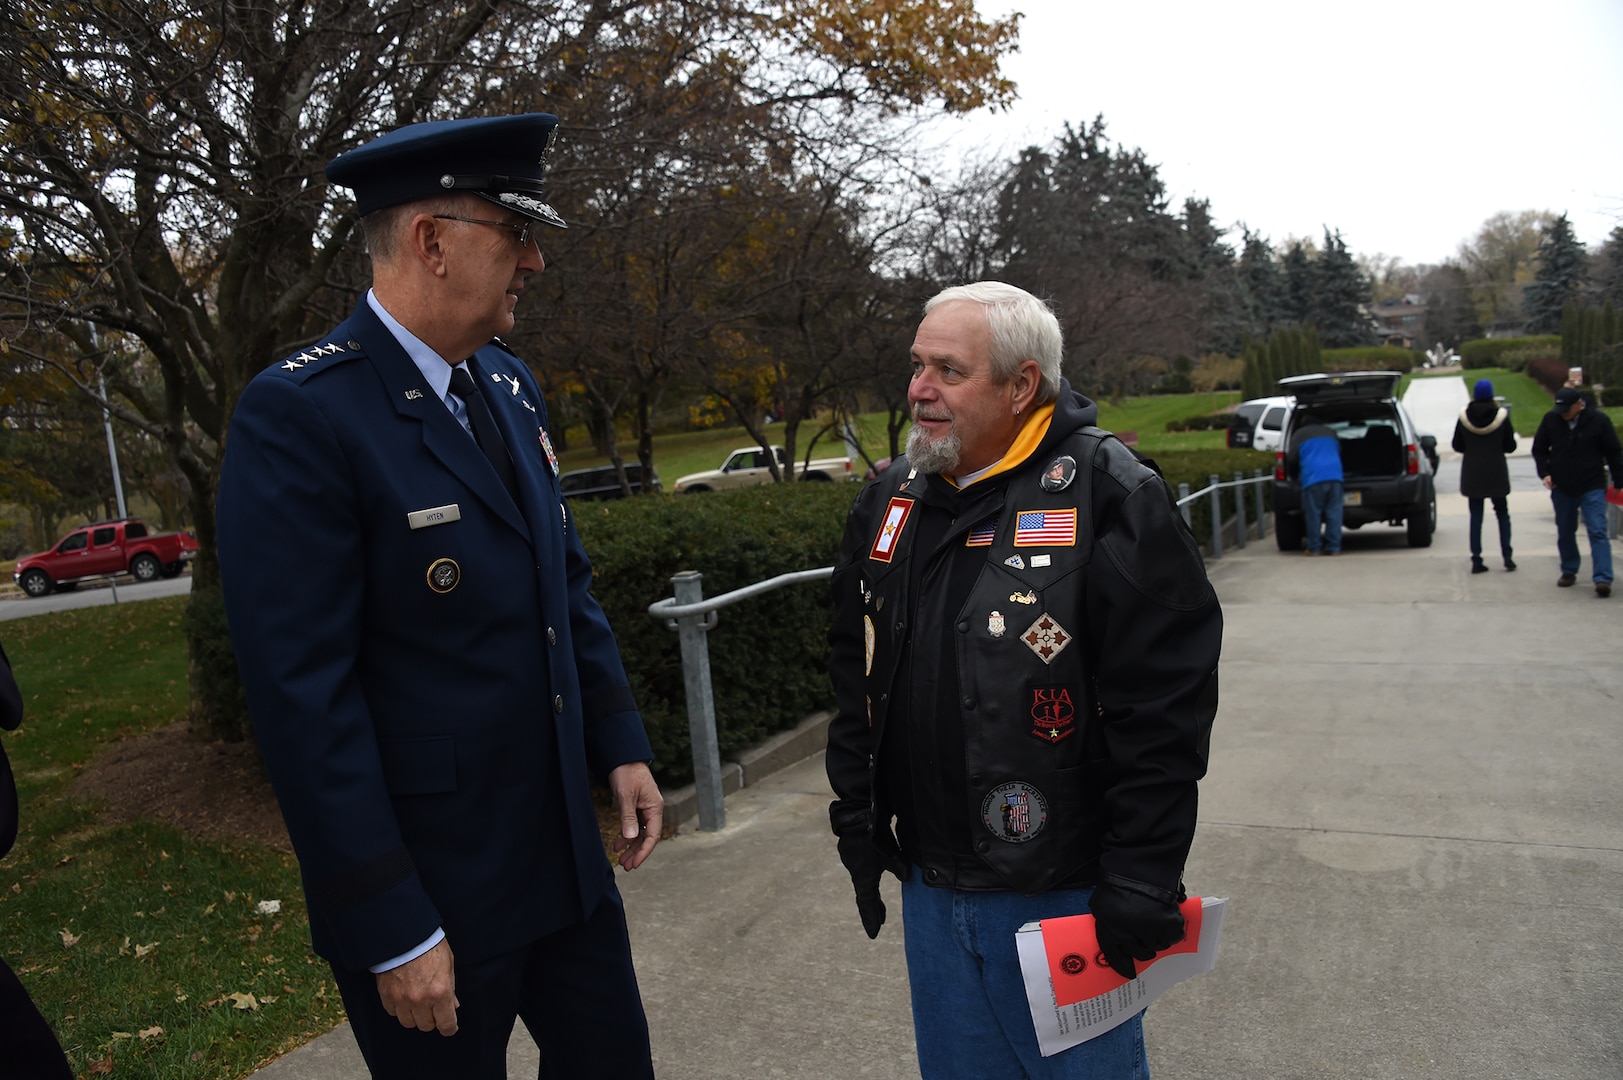 U.S. Air Force Gen. John Hyten, commander of U.S. Strategic Command, speaks with Lonnie Ford, a Gold Star father, before a Veterans Day ceremony at Memorial Park in Omaha, Neb., Nov. 11, 2017. Ford’s son, U.S. Army Sgt. Joshua Ford, was killed July 31, 2000, during combat operations in Al Numaniyah, Iraq. More than 200 people attended the ceremony to honor the service and sacrifice of American veterans and their families.